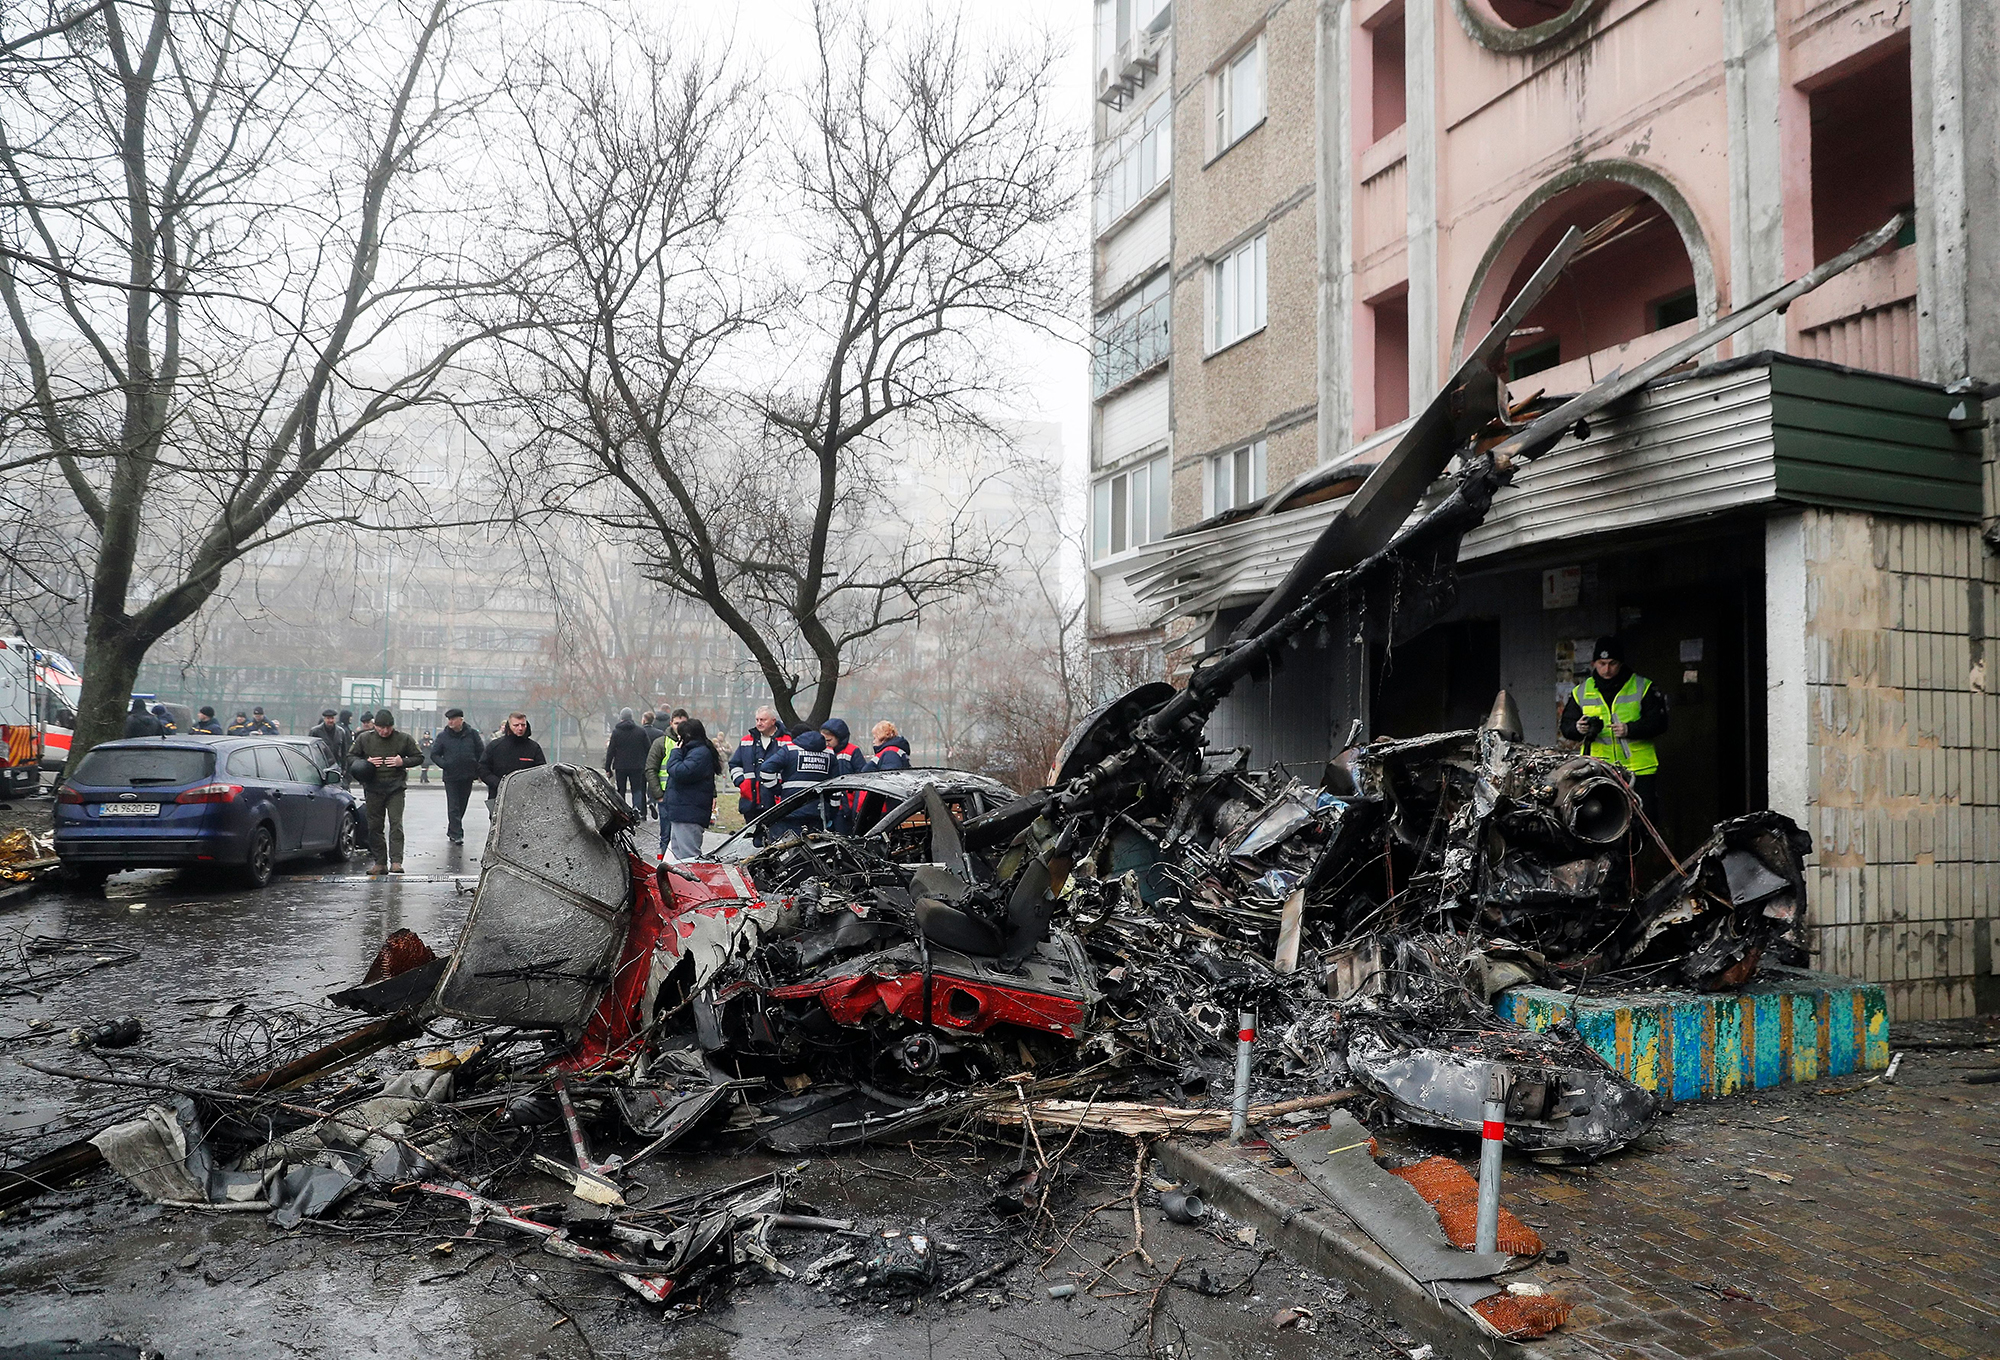 Rescue services work at the scene of a helicopter crash in Brovary, Ukraine, on January 18.